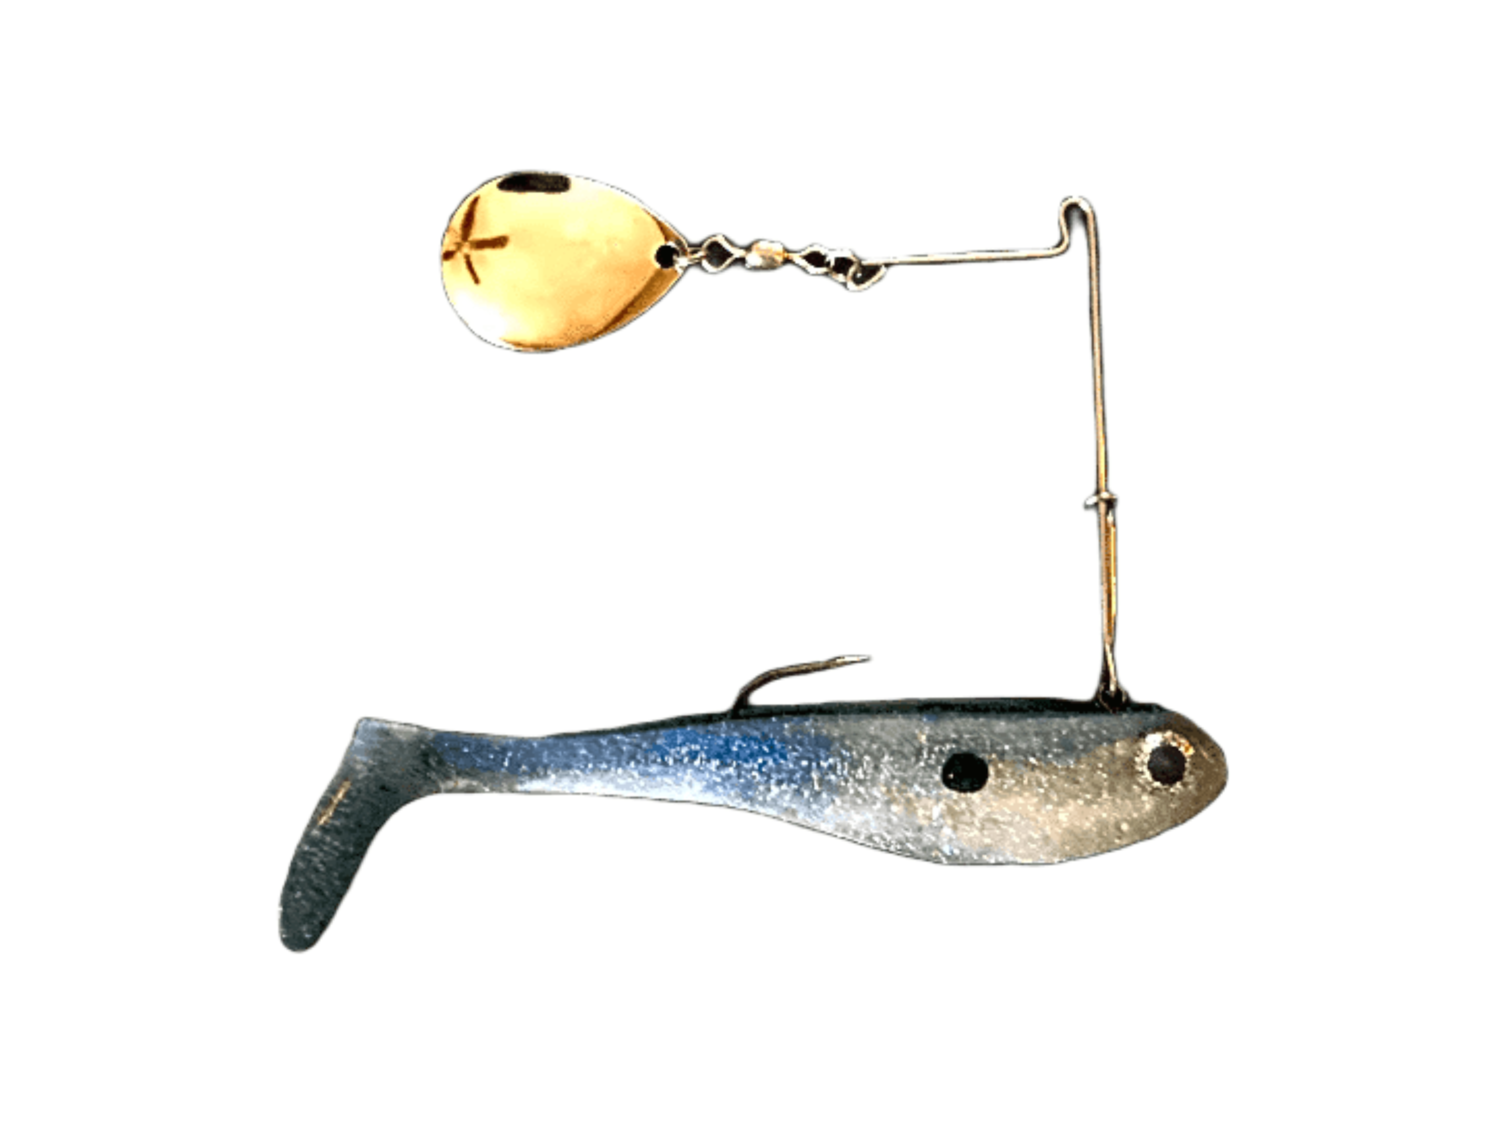 https://shopkarls.com/media/catalog/product/cache/1/image/9df78eab33525d08d6e5fb8d27136e95/a/a/aaron_s_baits_pre-rigged_wag_with_spinner_1.png